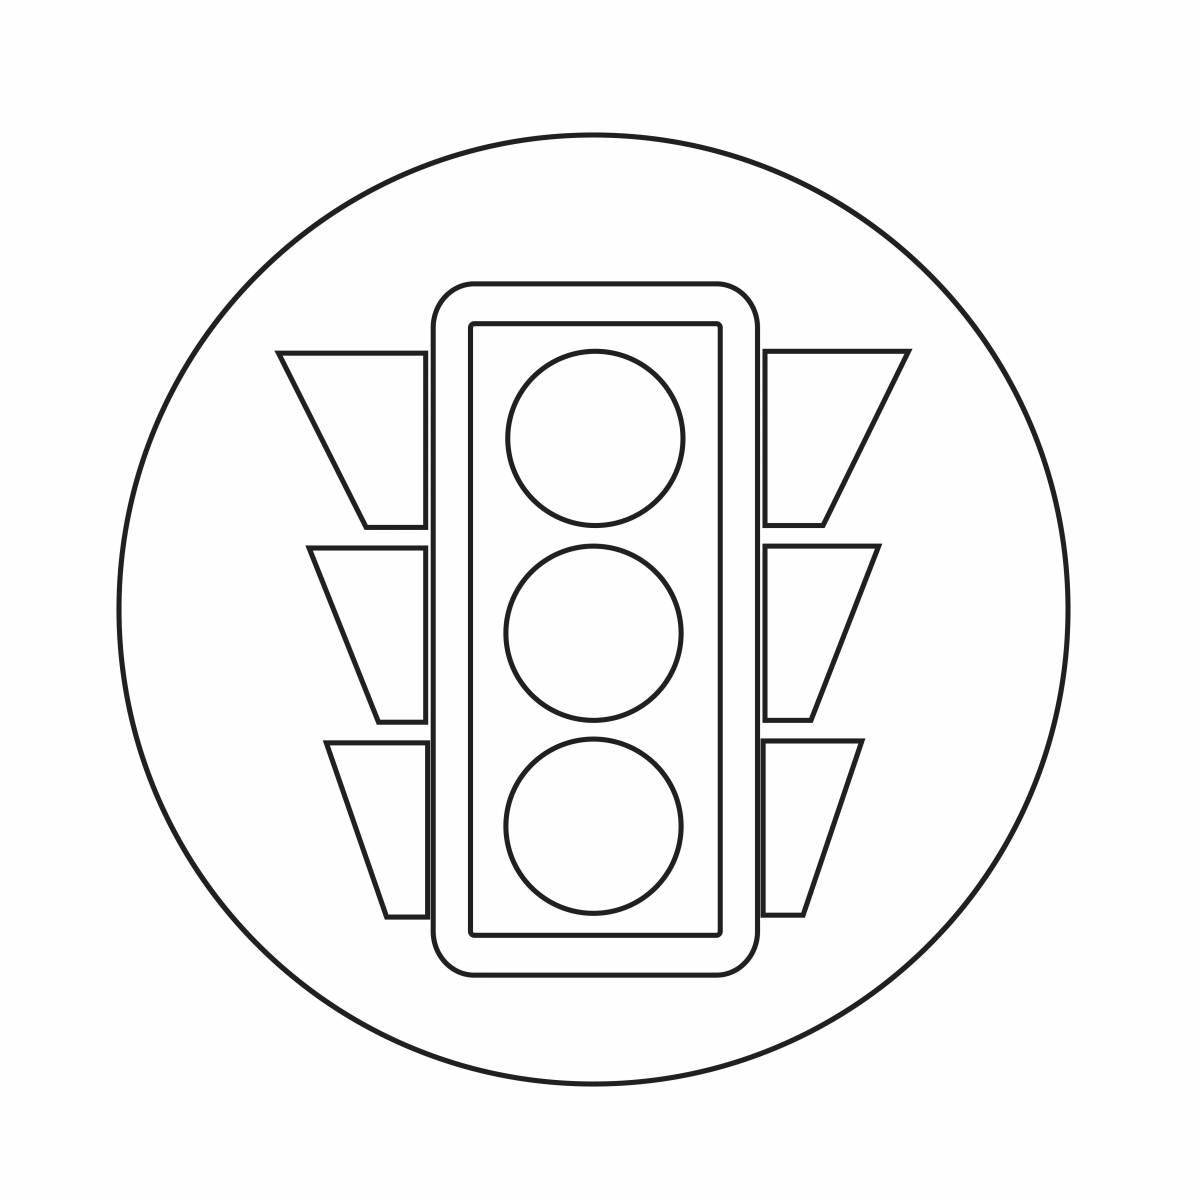 Colorful traffic light sign coloring book